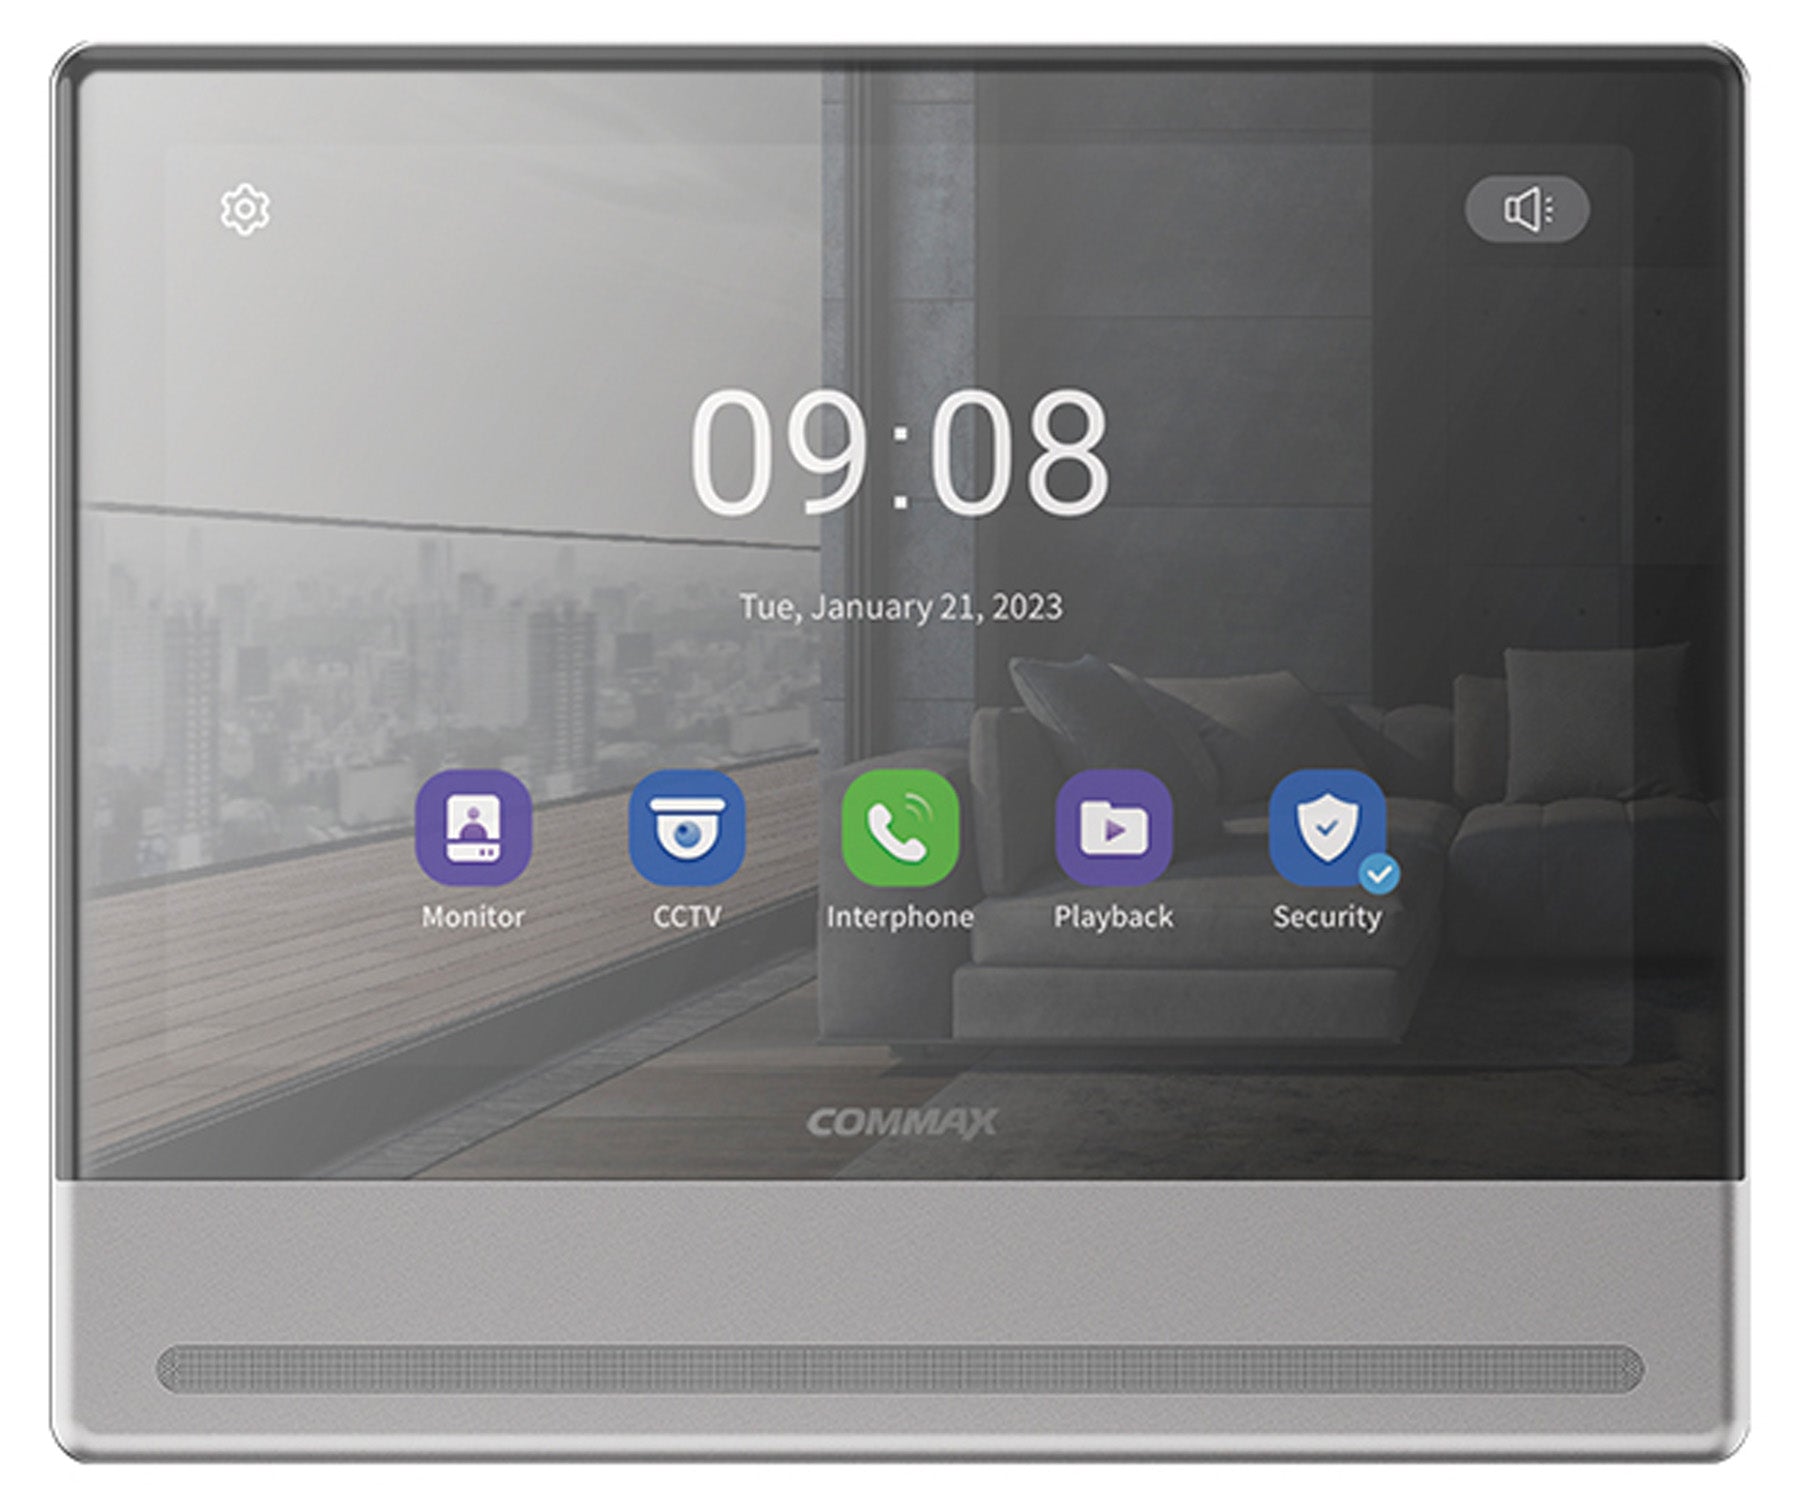 Commax Fine View 10" Handsfree Smart Wall Pad with Memory Record and Smartphone Connectable, Neo Silver, CDV-1004QT